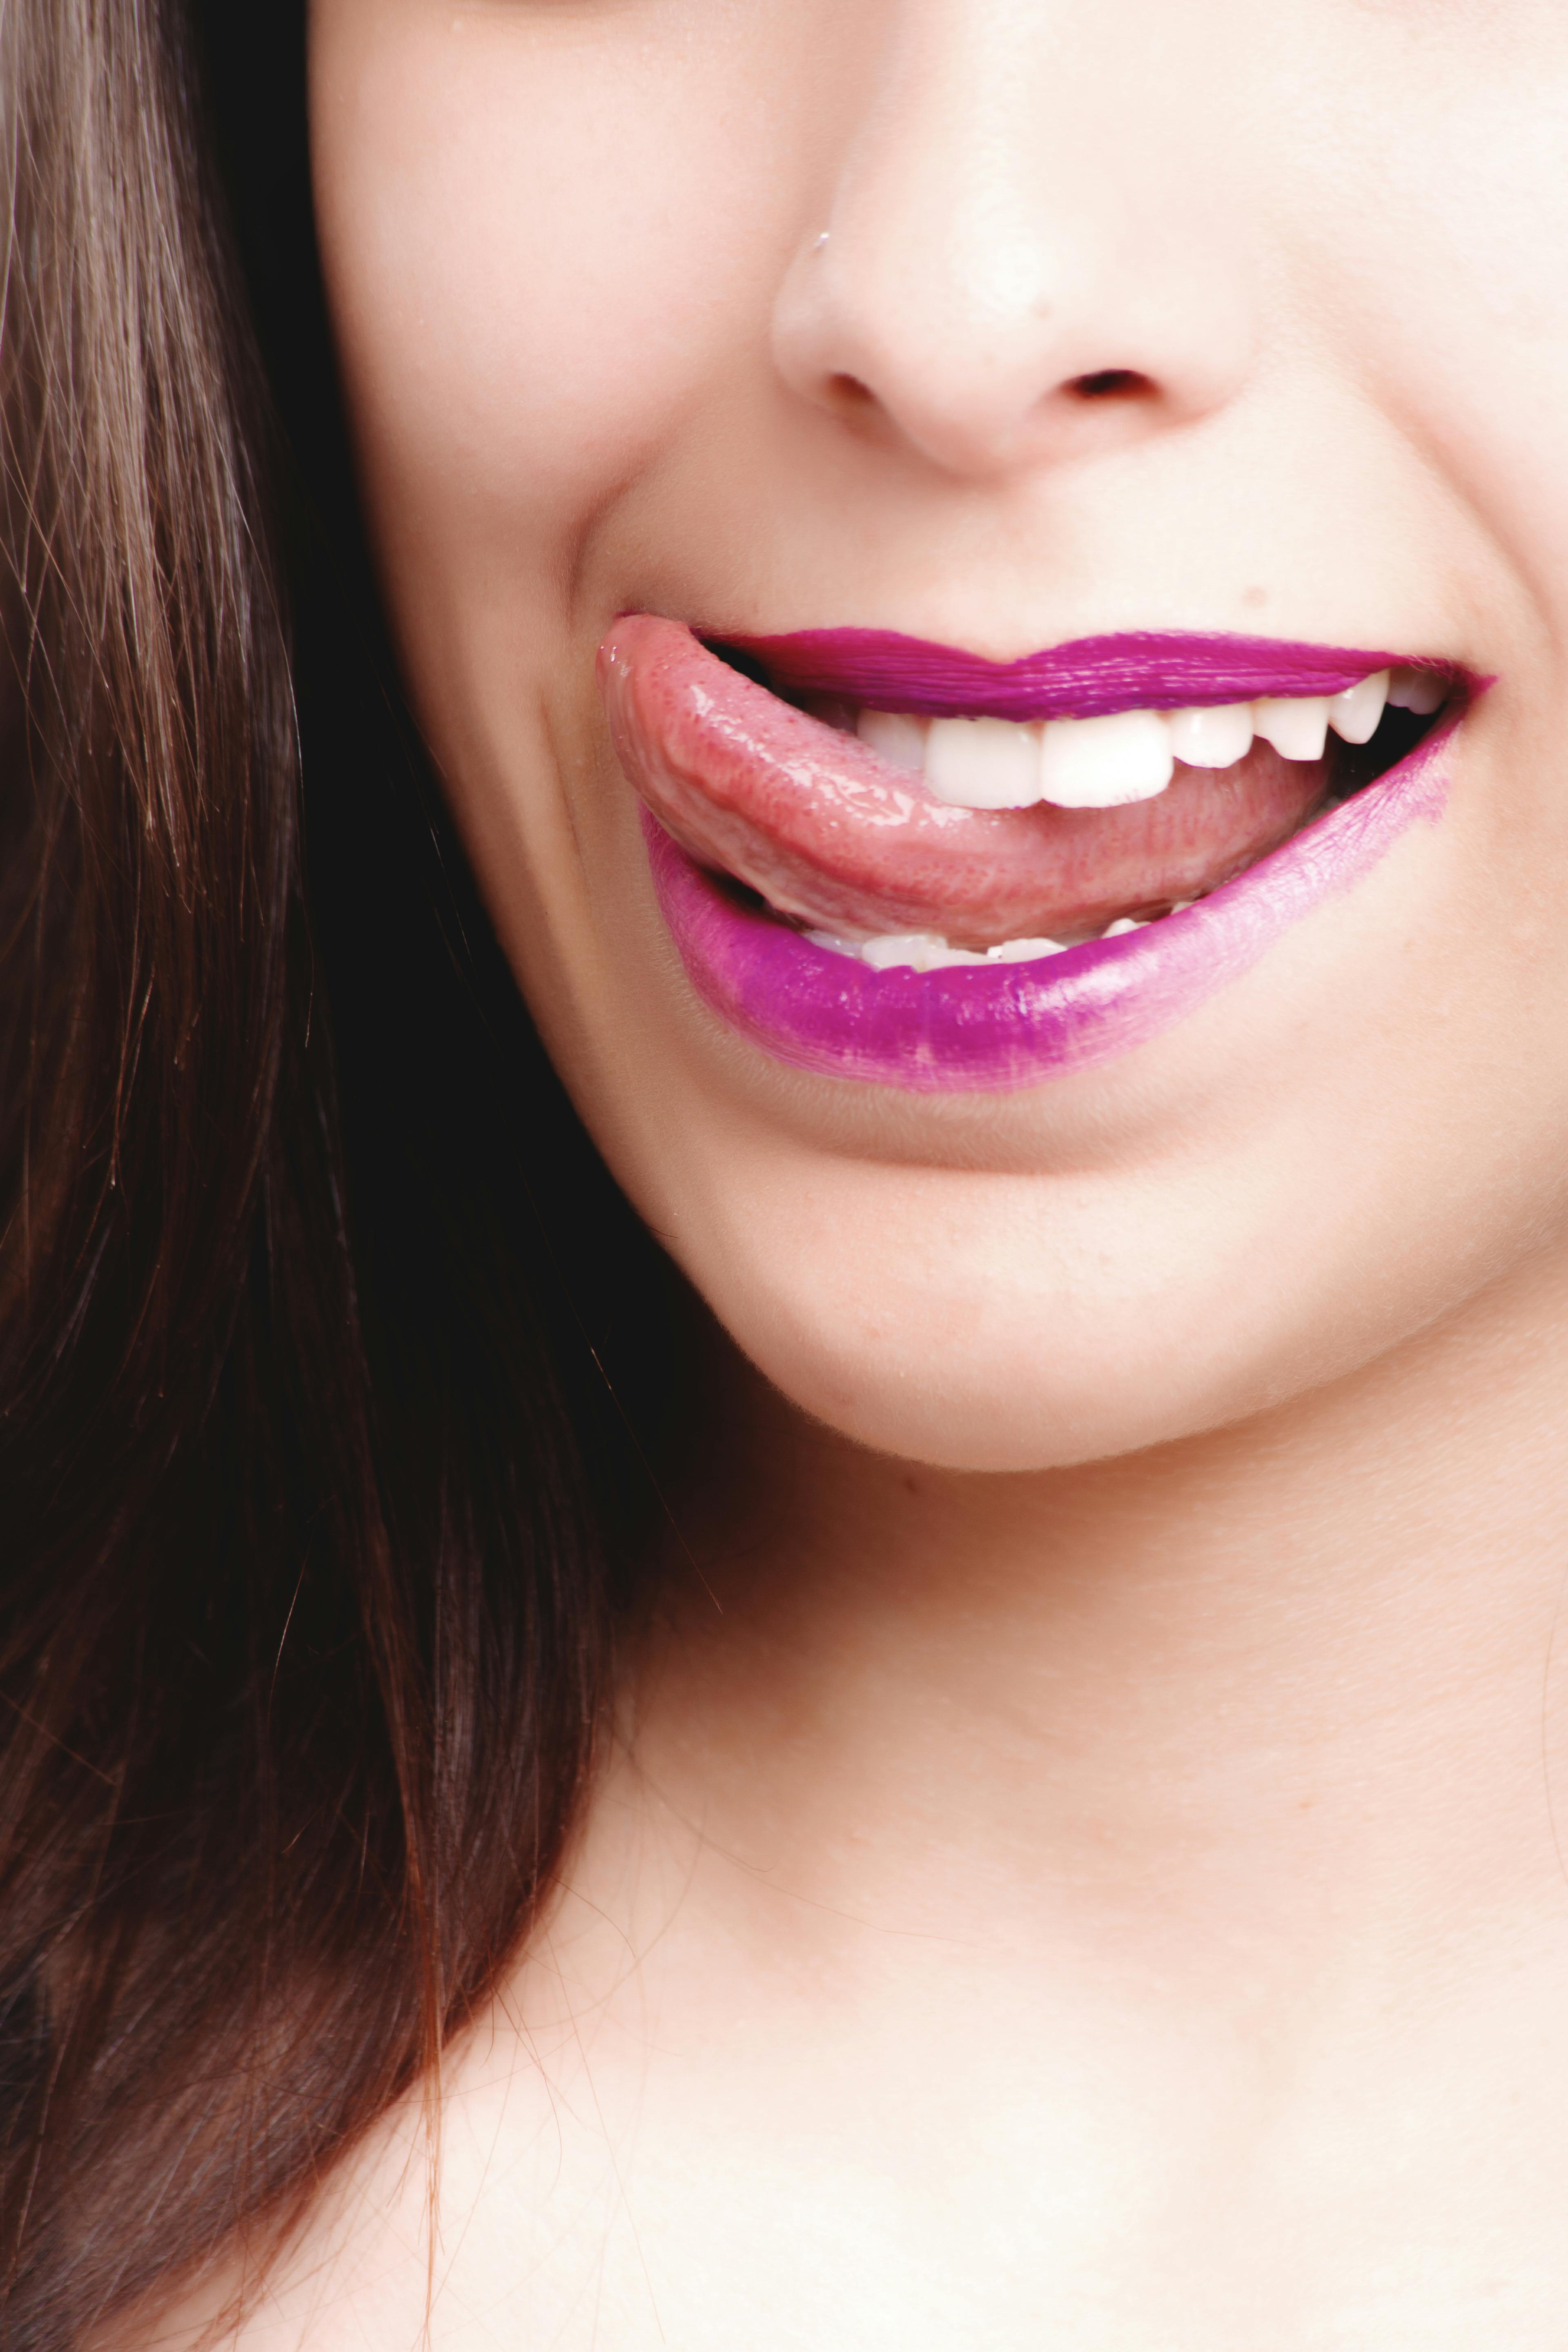 Woman Licking With Purple Lips Free Stock Photo Images, Photos, Reviews